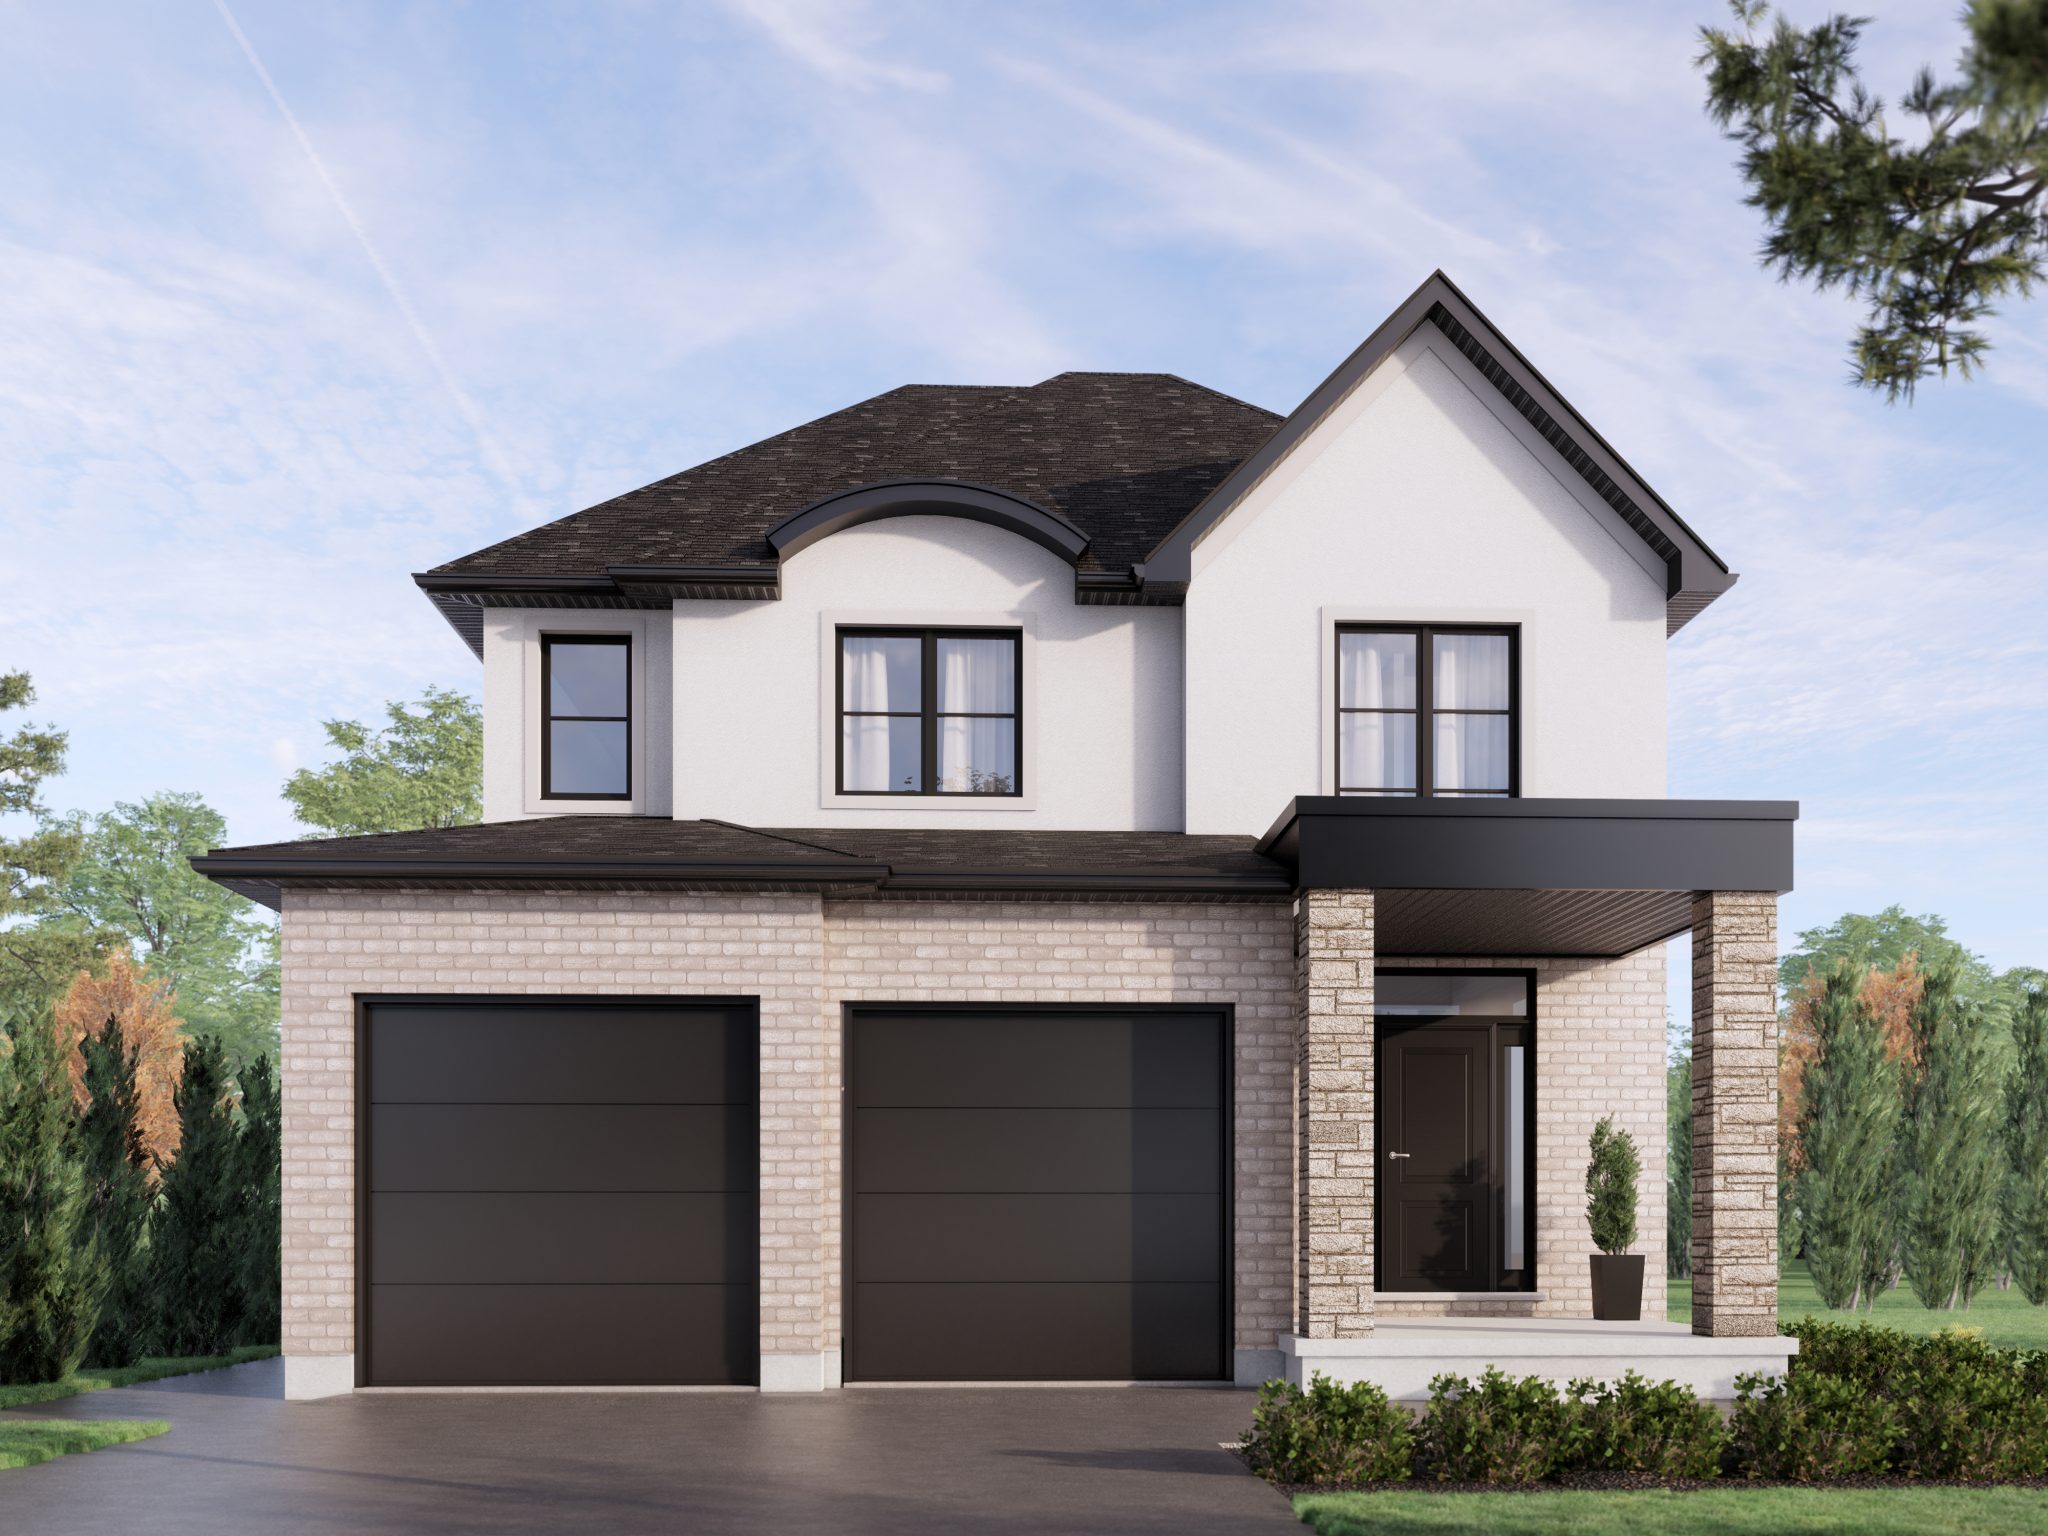 Everton Homes presents the Belle Model home